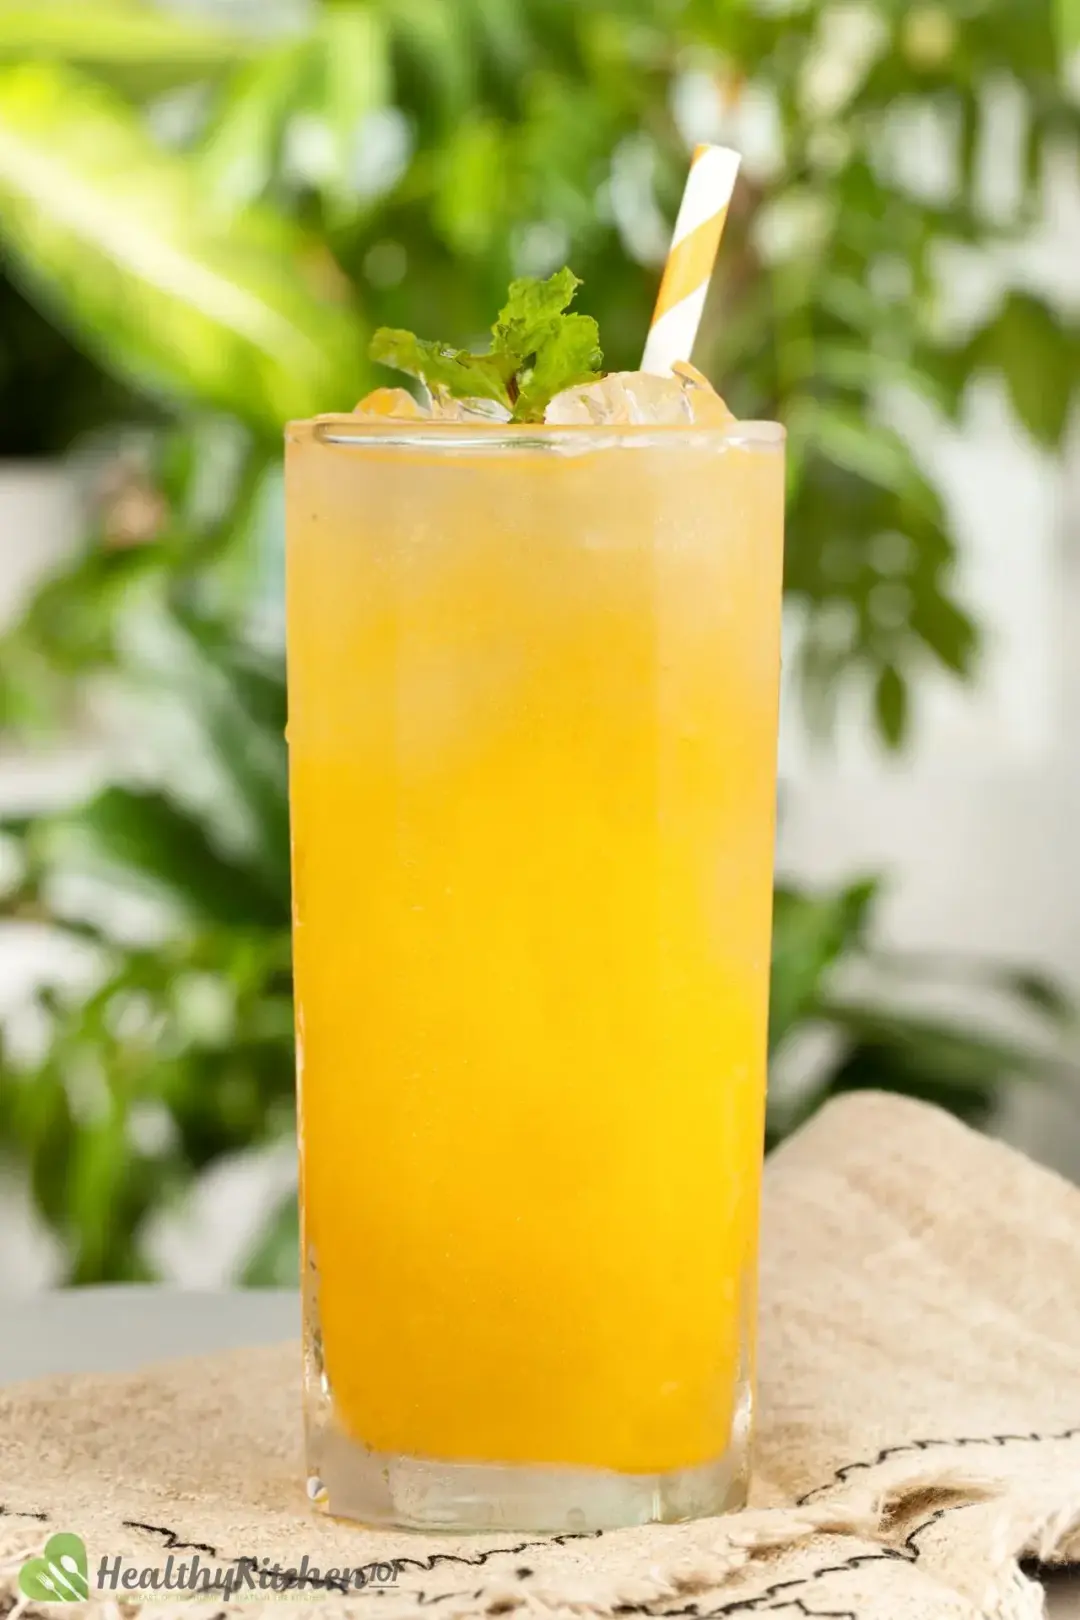 A tall glass of orange juice and ginger ale cocktail on a kitchen cloth